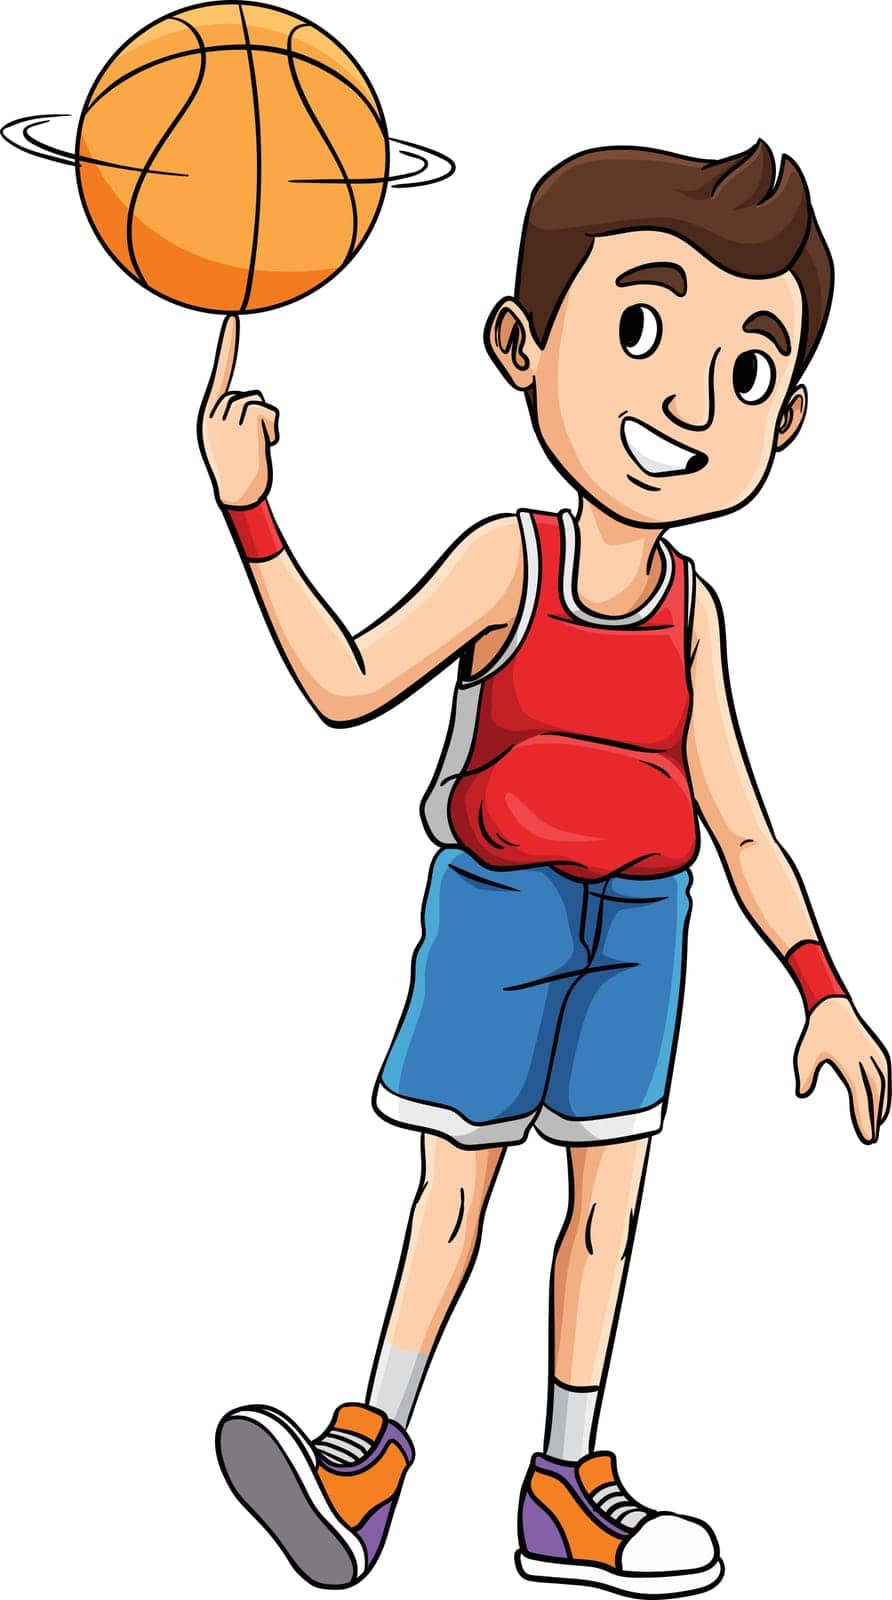 This cartoon clipart shows a Basketball Boy Spinning the Ball illustration.